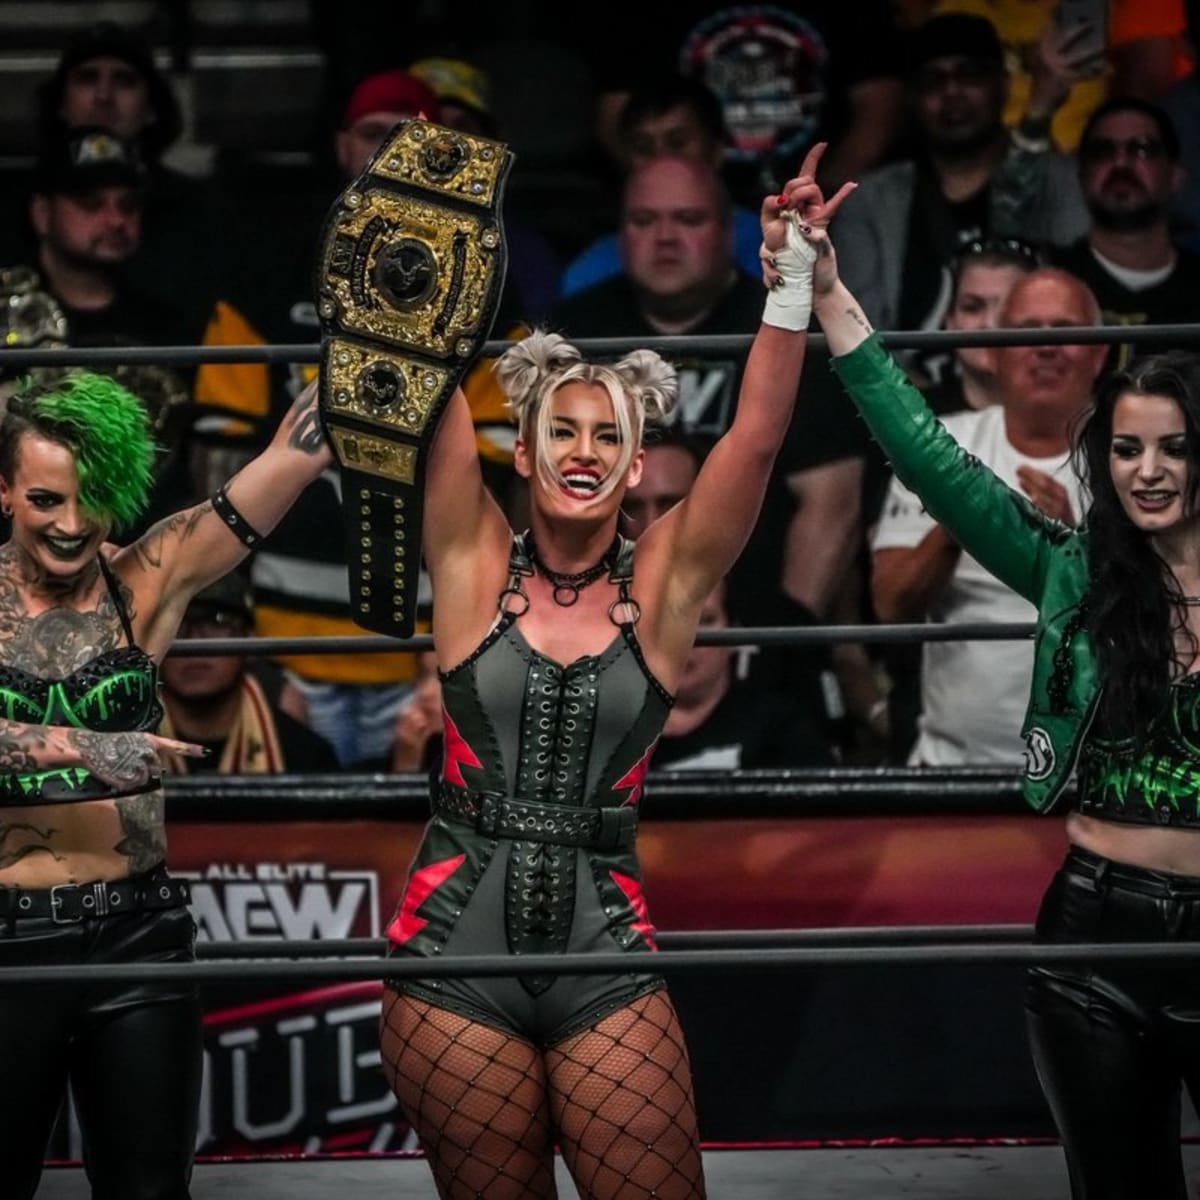 Toni Storm wins AEW Women's World title at Double or Nothing - WON/F4W - WWE news, Pro Wrestling News, WWE Results, AEW News, AEW results